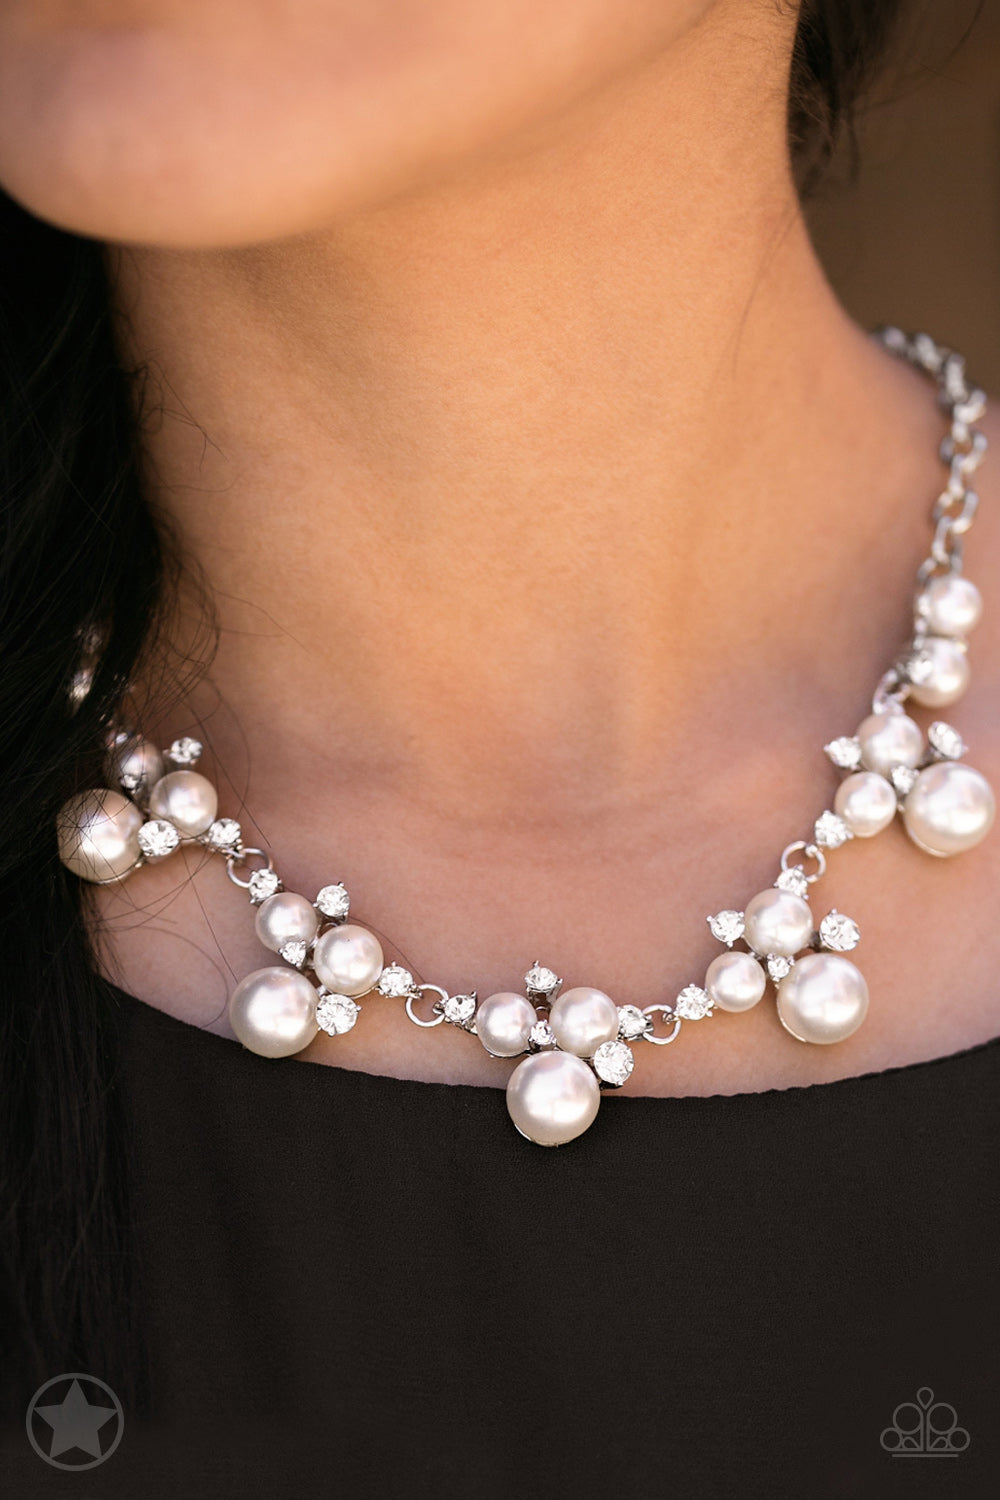 Paparazzi Accessories - HEIRESS of Them All #N511 Box 6 - White Necklace